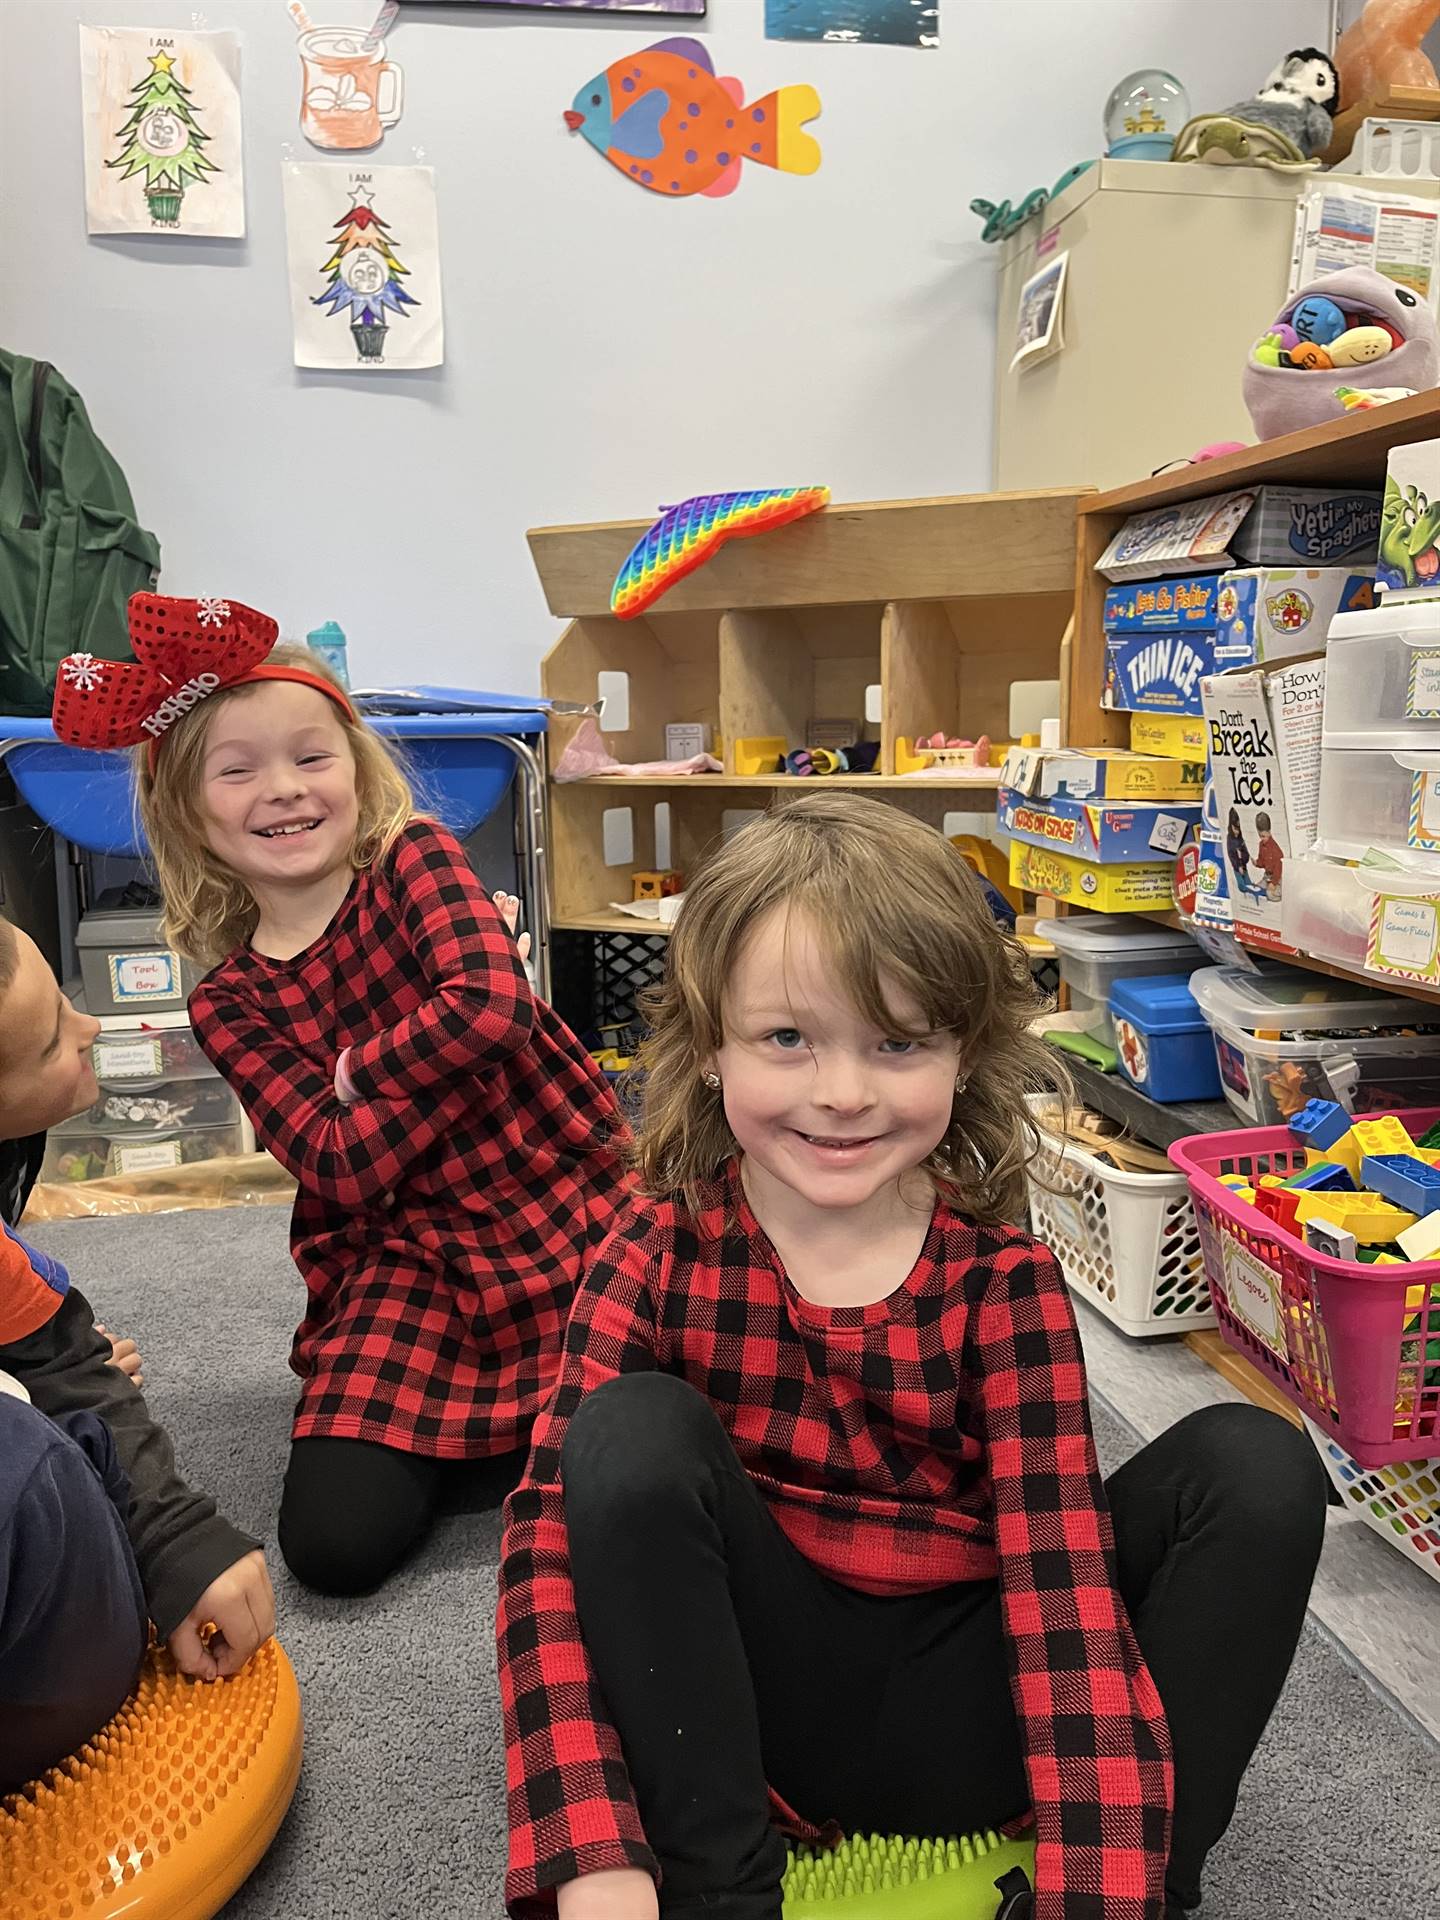 2 students in matching black and red plaid shirts